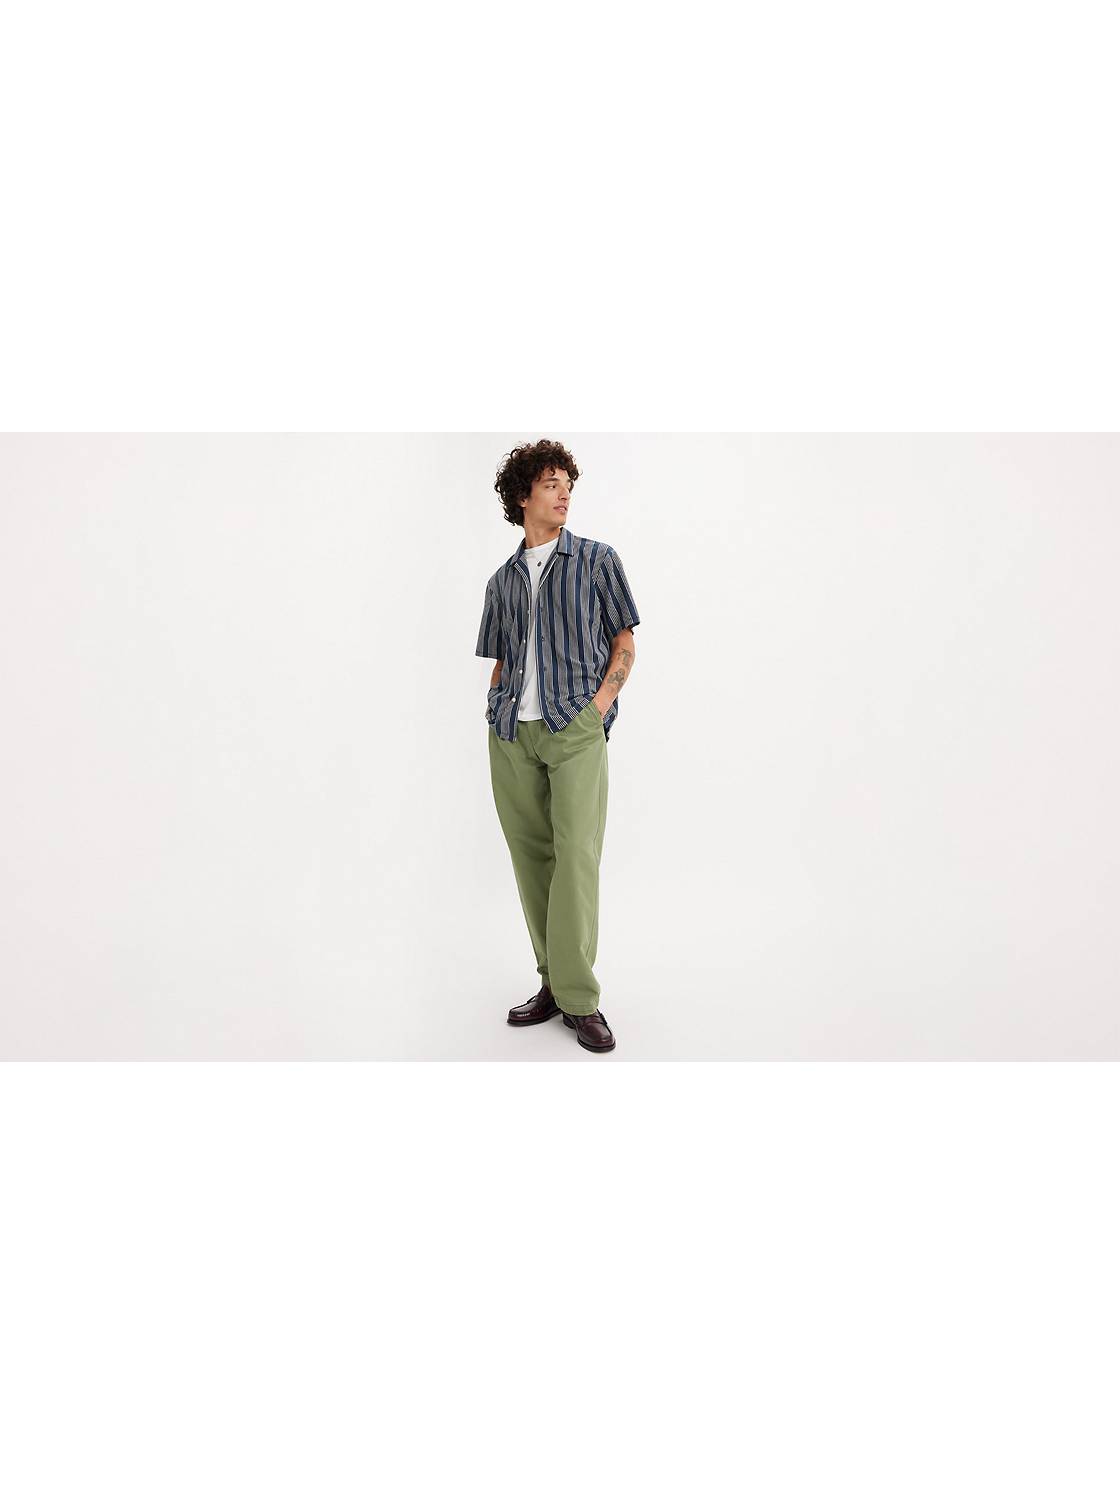 XX Chino Loose Straight Pleated Pants 1